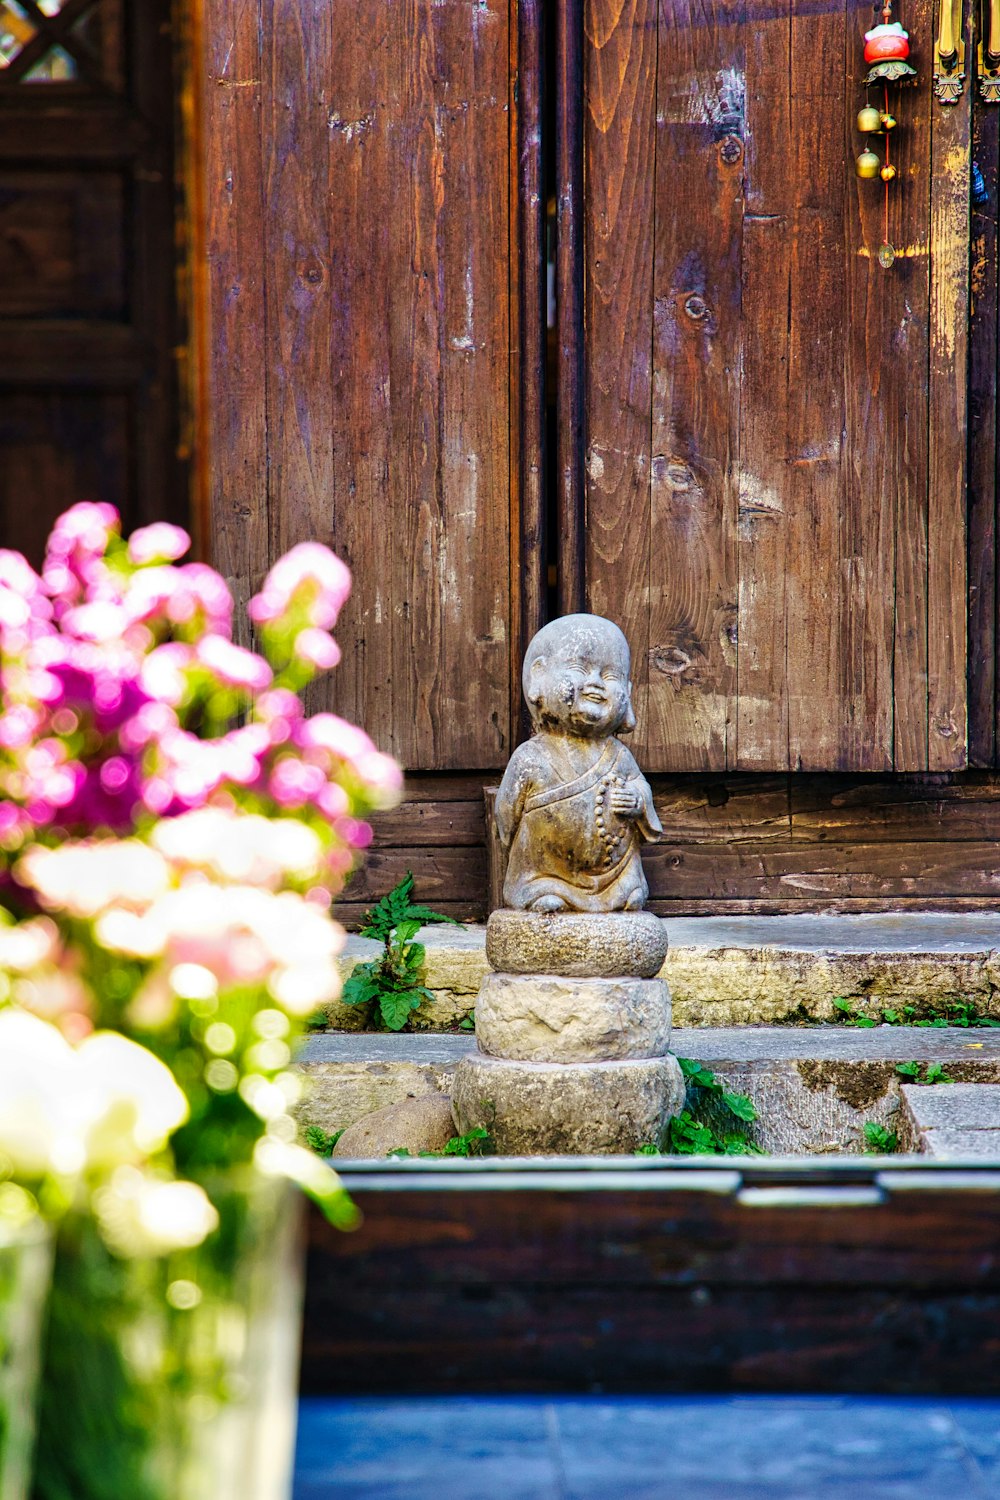 a small buddha statue sitting in front of a wooden door